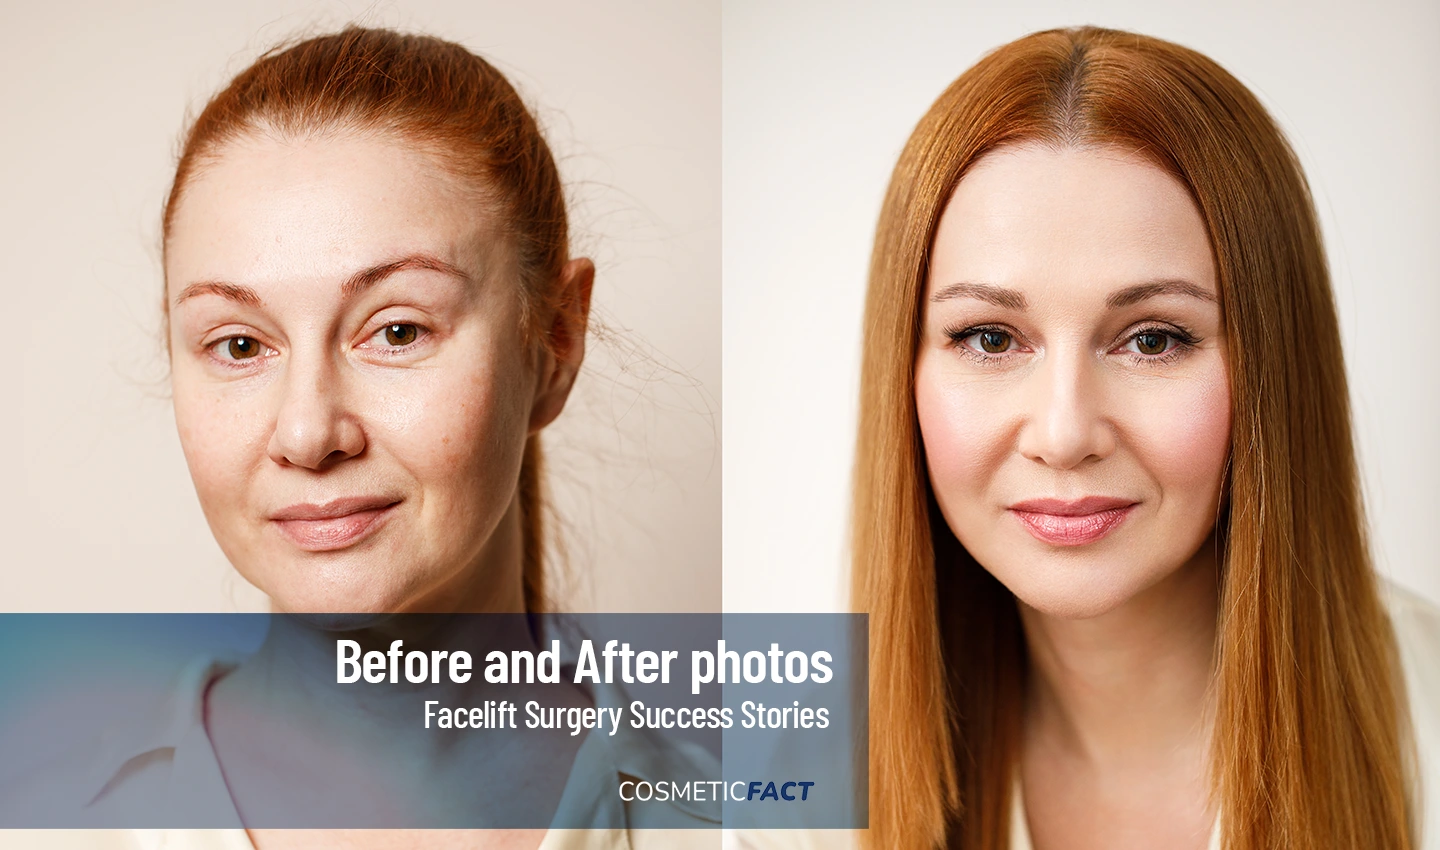 Facelift Success Stories from Real Patients who Share their Before and After Photos